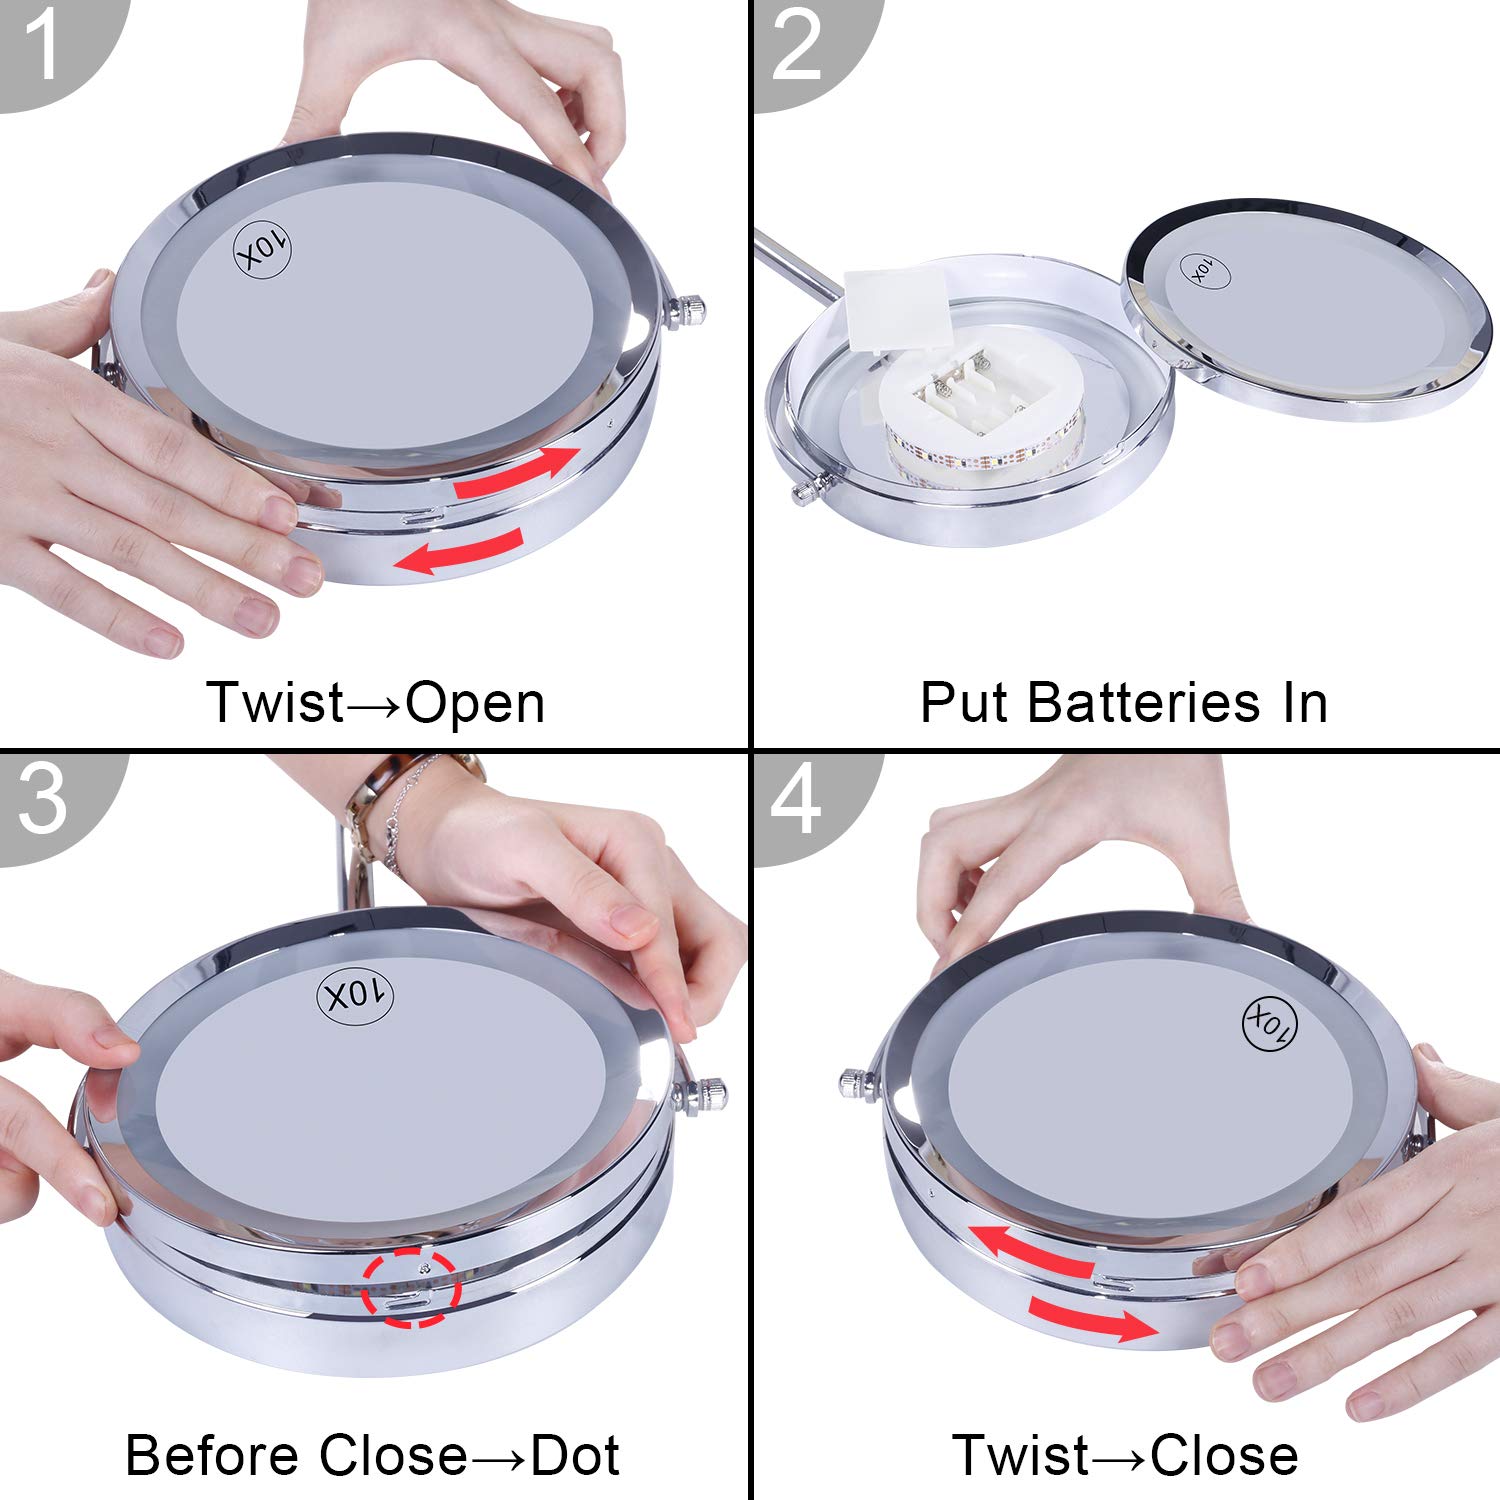 To put in the batteries simply twist the face of the mirror off. Put the batteries in and twist lid back on